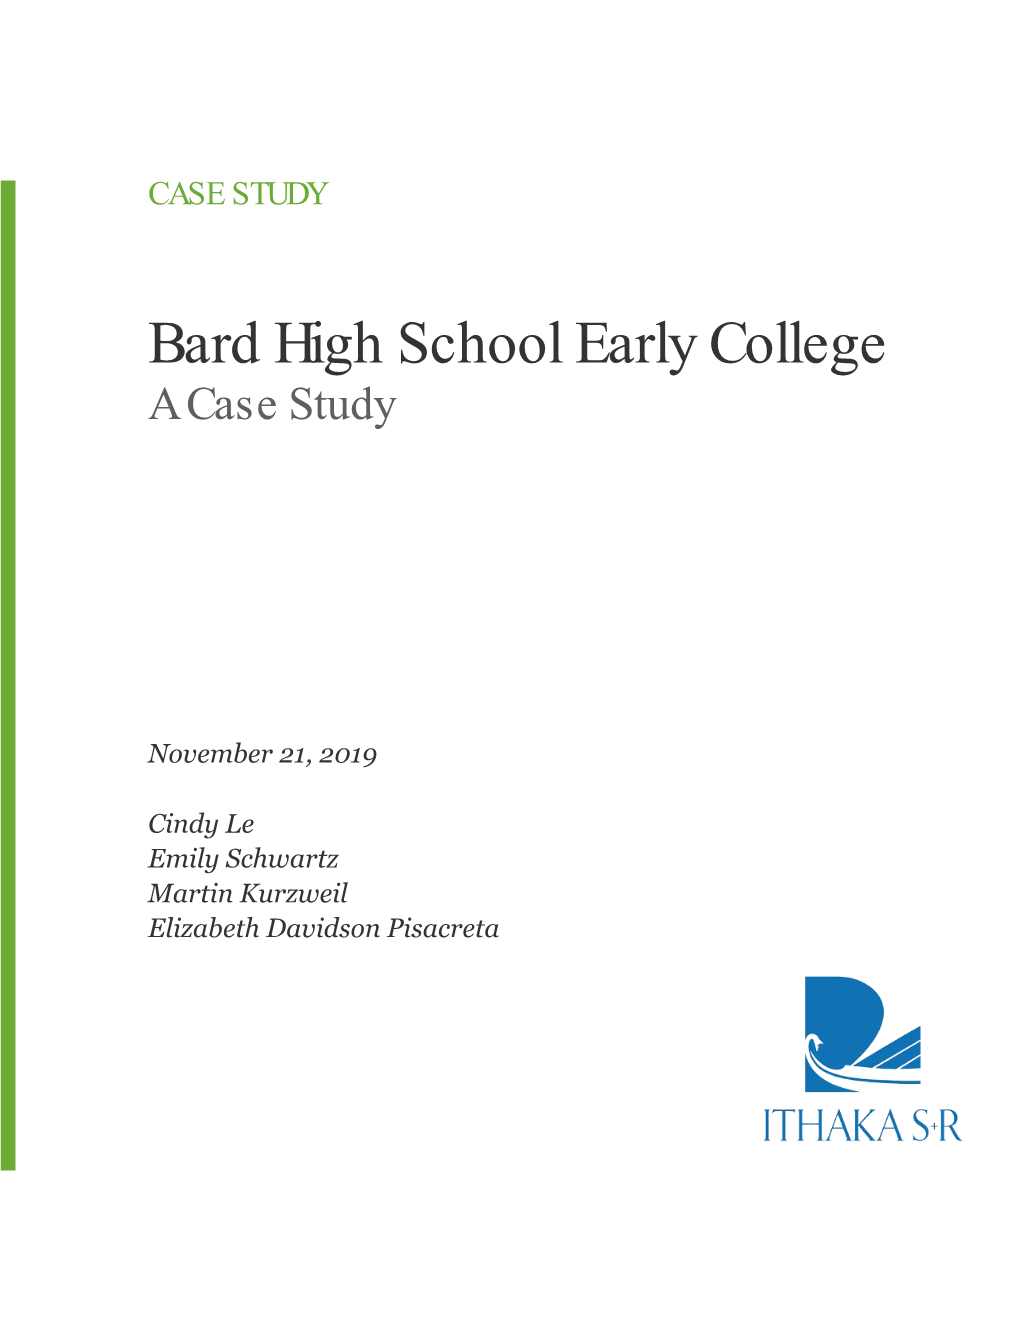 Bard High School Early College a Case Study